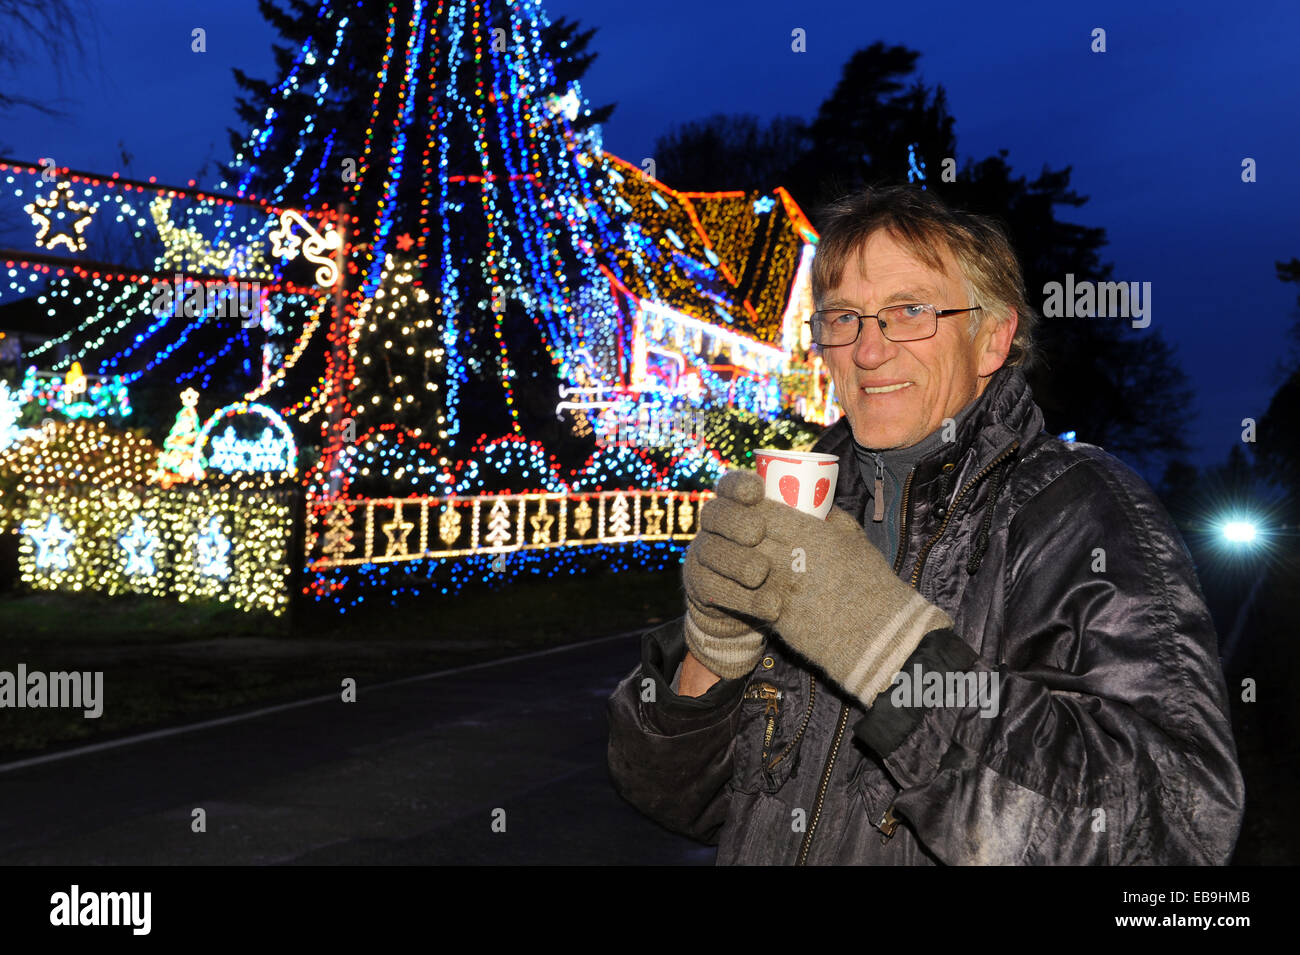 Bruchhausen-Vilsen, Germany. 26th Nov, 2014. Rolf Vogt, operator of the Christmas House, tests the functions of his lights on the country highway near Bruchhausen-Vilsen, Germany, 26 November 2014. On 29 November, the Christmas House will be lit up every day at sunset until the New Year. Photo: INGO WAGNER/dpa/Alamy Live News Stock Photo